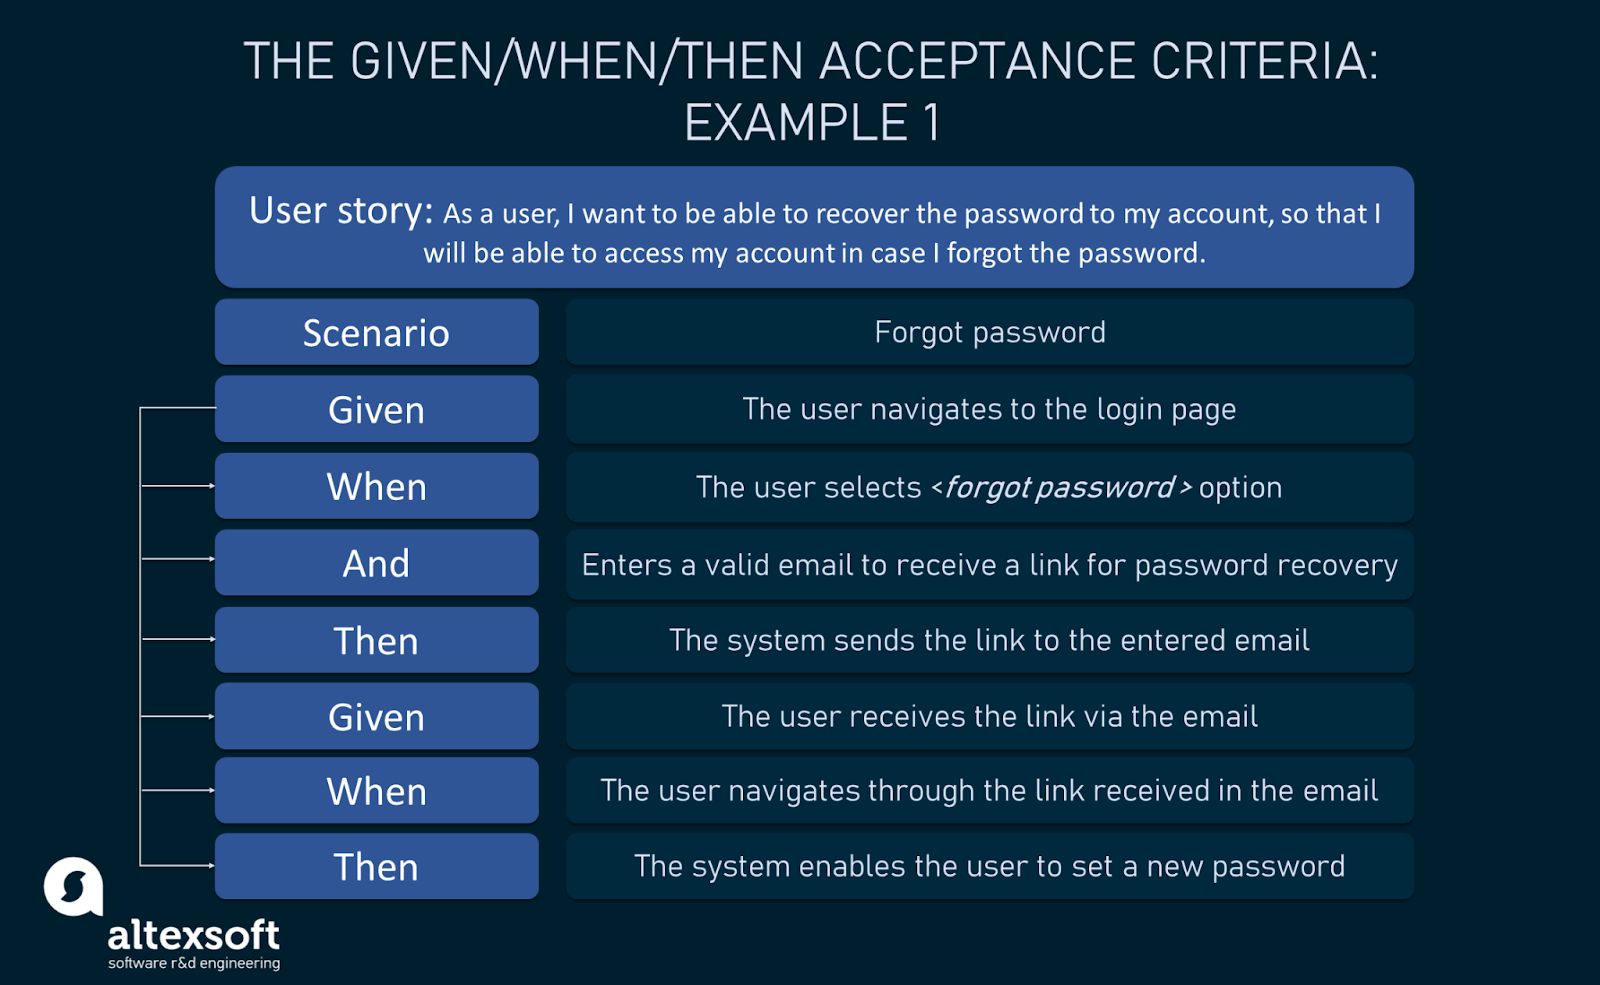 Recovering the password acceptance criteria example